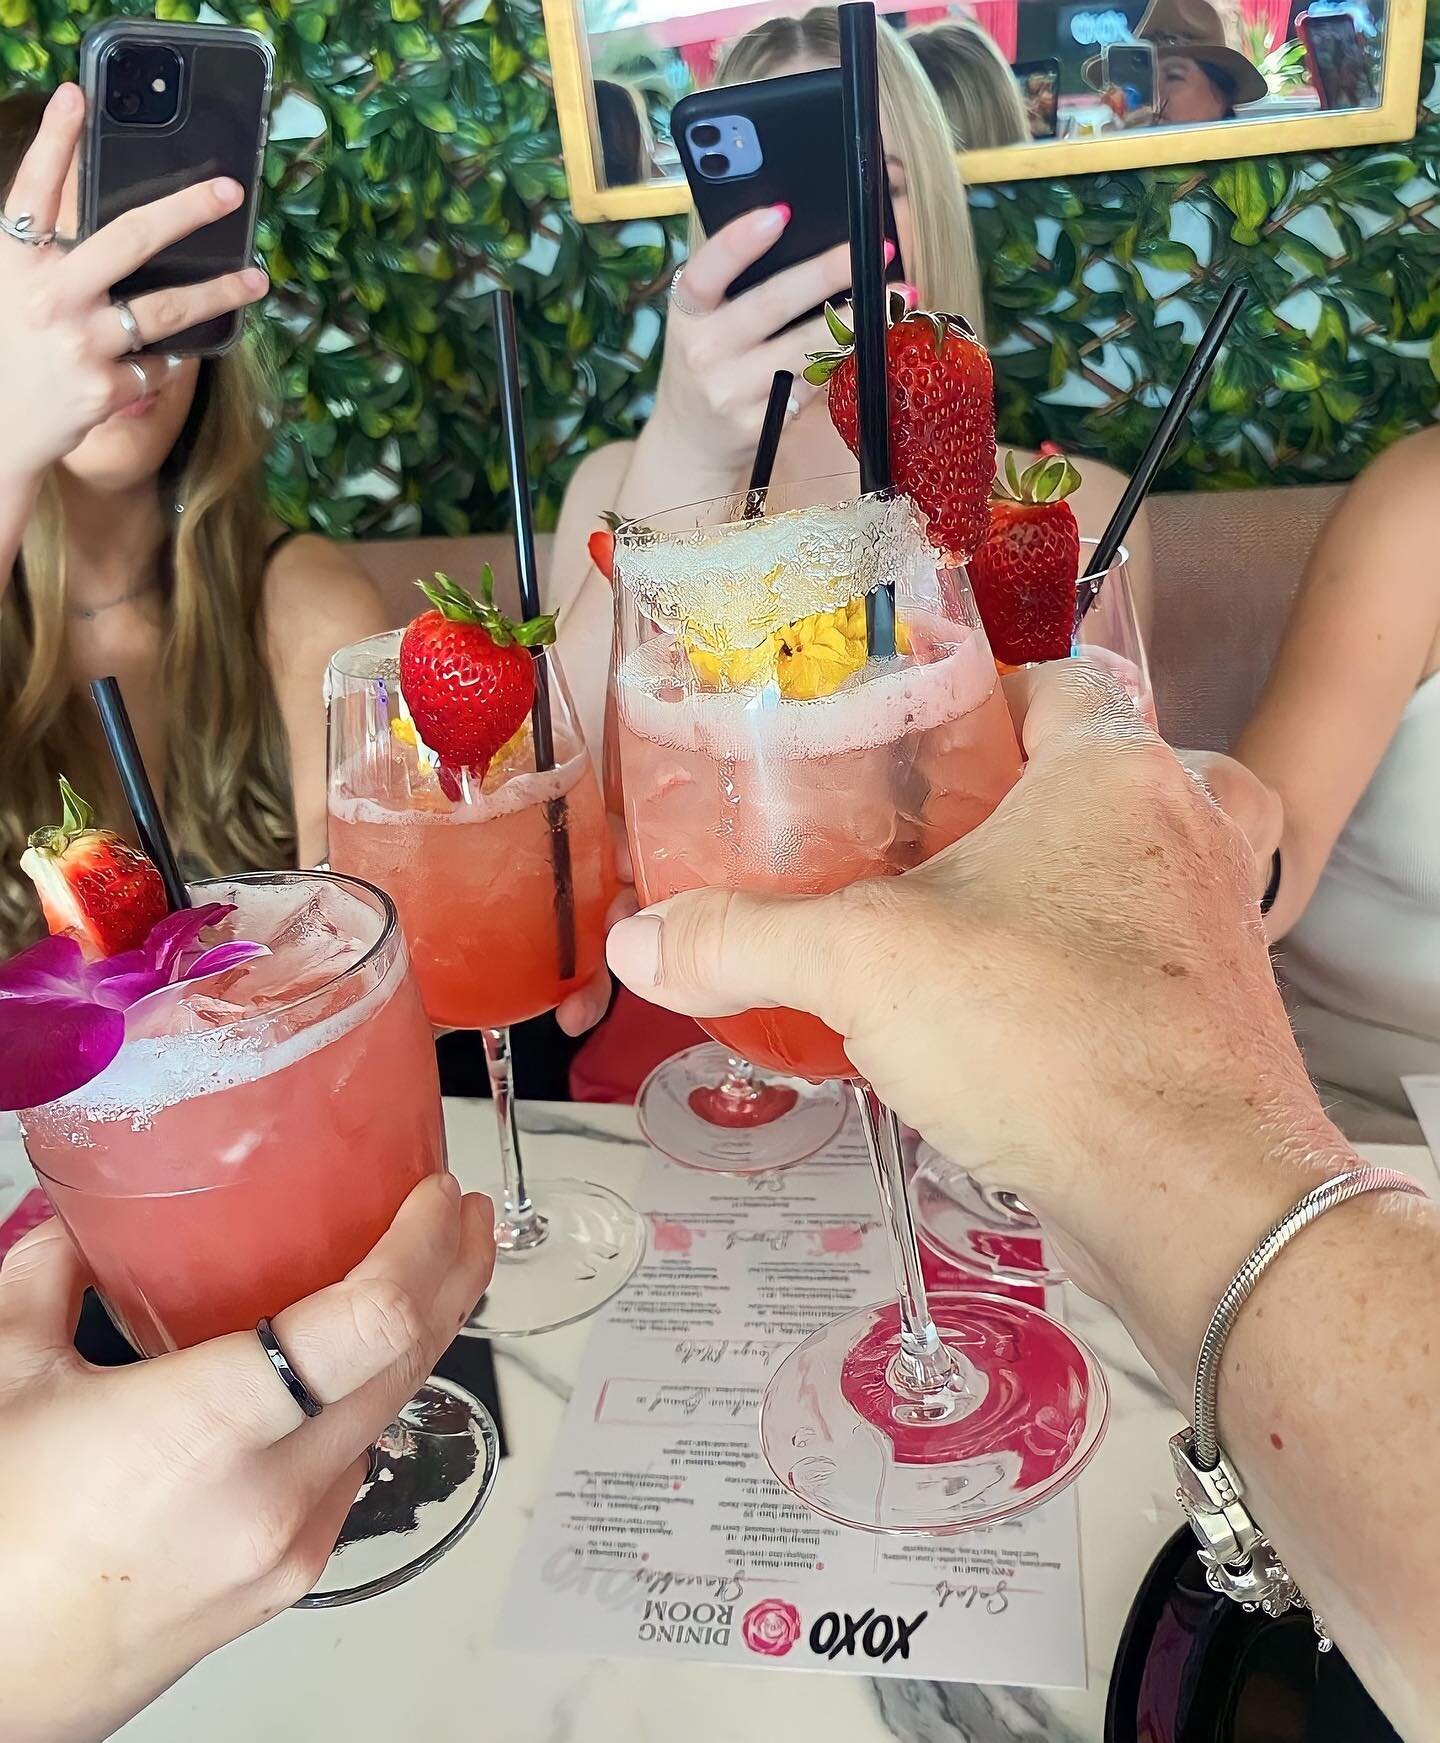 Phone DRINKS first 😉🥂📸

See you tonight for $10 Uptown Diva Cocktails 💋💕💅🏽 #ladiesnight #xoxo

Book your reservation on our profile or walk-in with your girl gang 👩🏼&zwj;🤝&zwj;👩🏽👩🏼&zwj;🤝&zwj;👩🏽